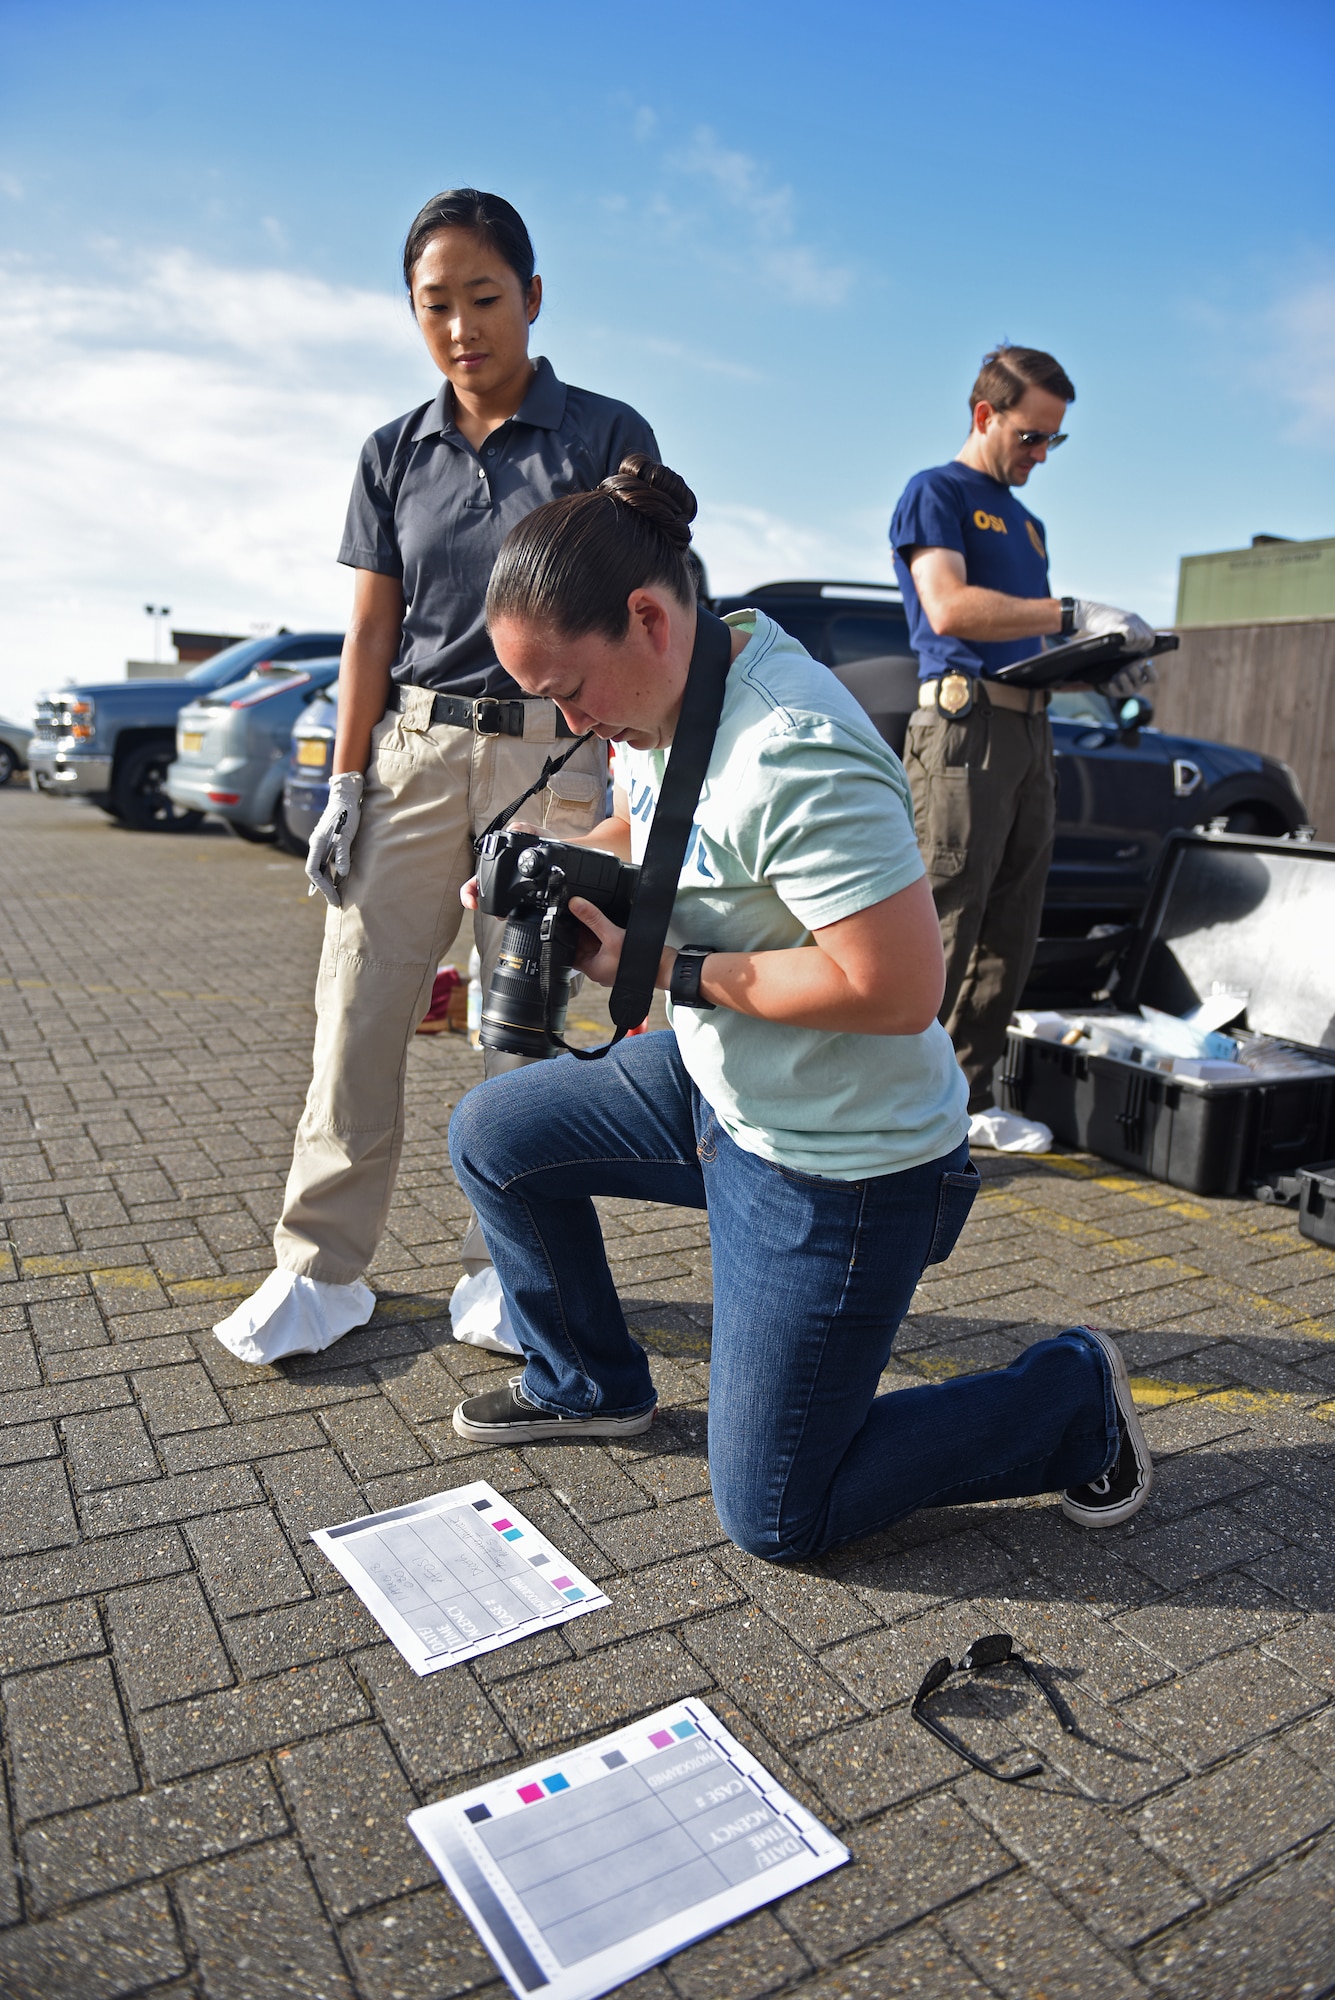 U.S. Air Force Senior Airman Alexandra West, 100th Air Refueling Wing Public Affairs broadcast journalist, documents a photo identifier before going into a simulated crime scene during crime scene processing training at RAF Mildenhall, England, Aug. 1, 2018. The training included members of Air Force Office of Special Investigations Detachment 512, 100th Security Forces Squadron Intelligence and Investigations unit and 100th ARW Public Affairs, who worked together to compare and develop crime scene processing skills. (U.S. Air Force photo by Senior Airman Luke Milano)